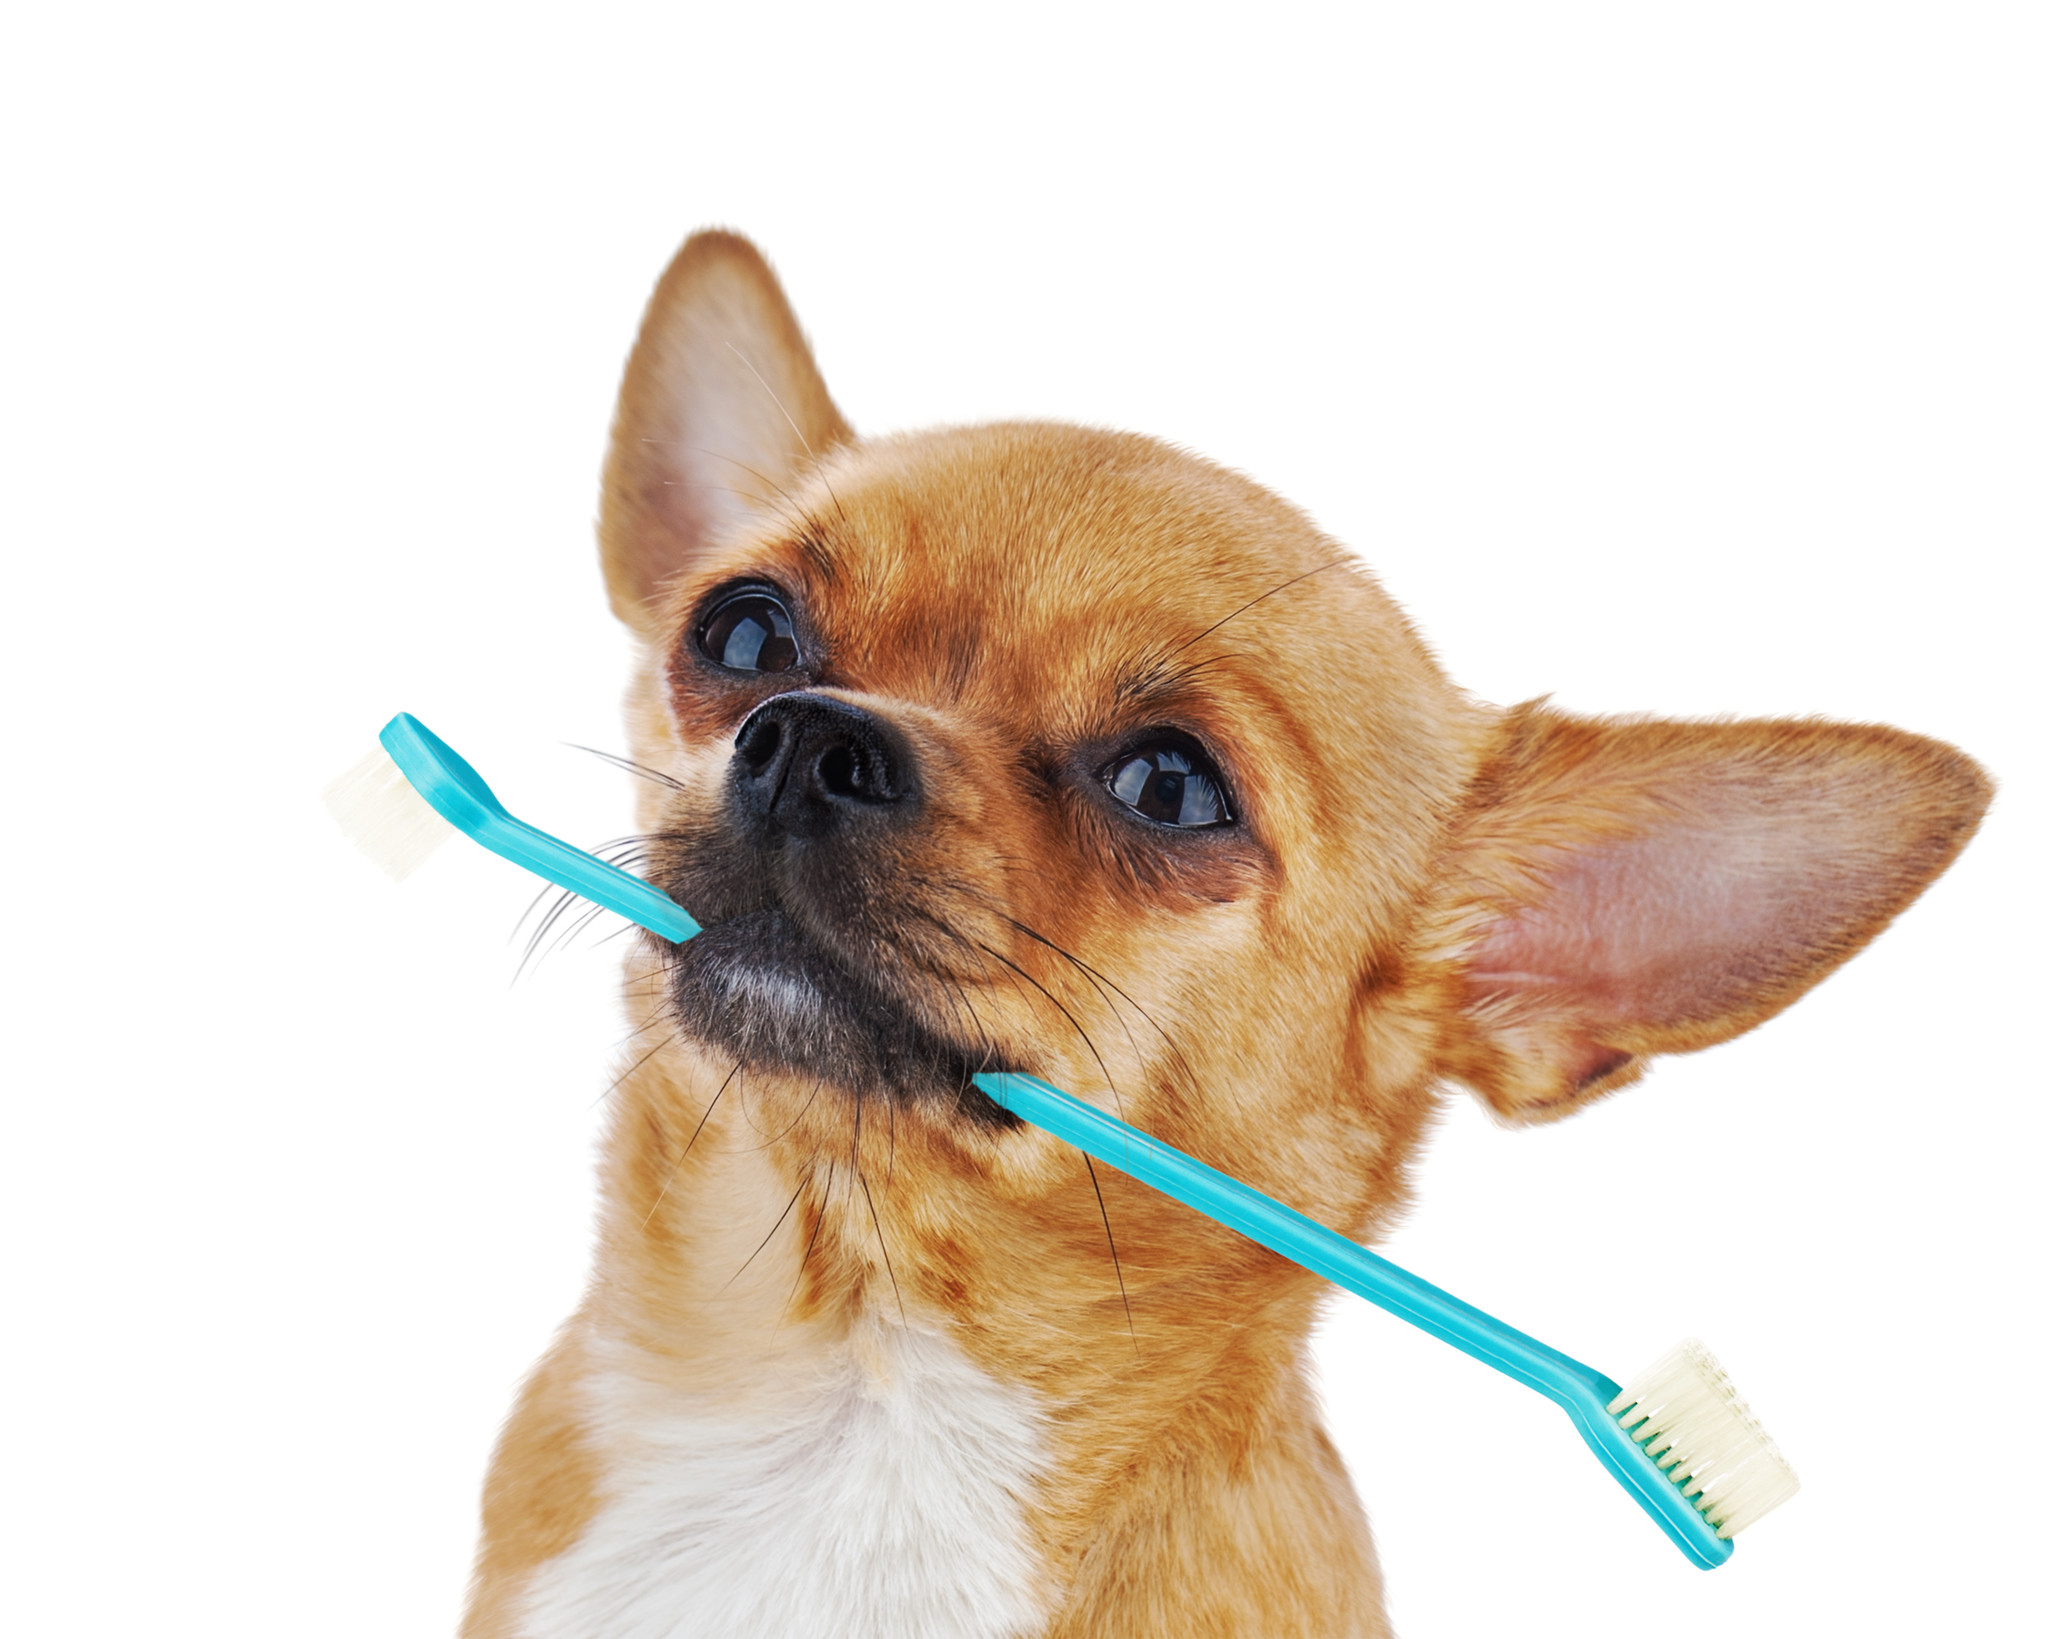 6 Ways to Take Care of your Dog's Oral Health